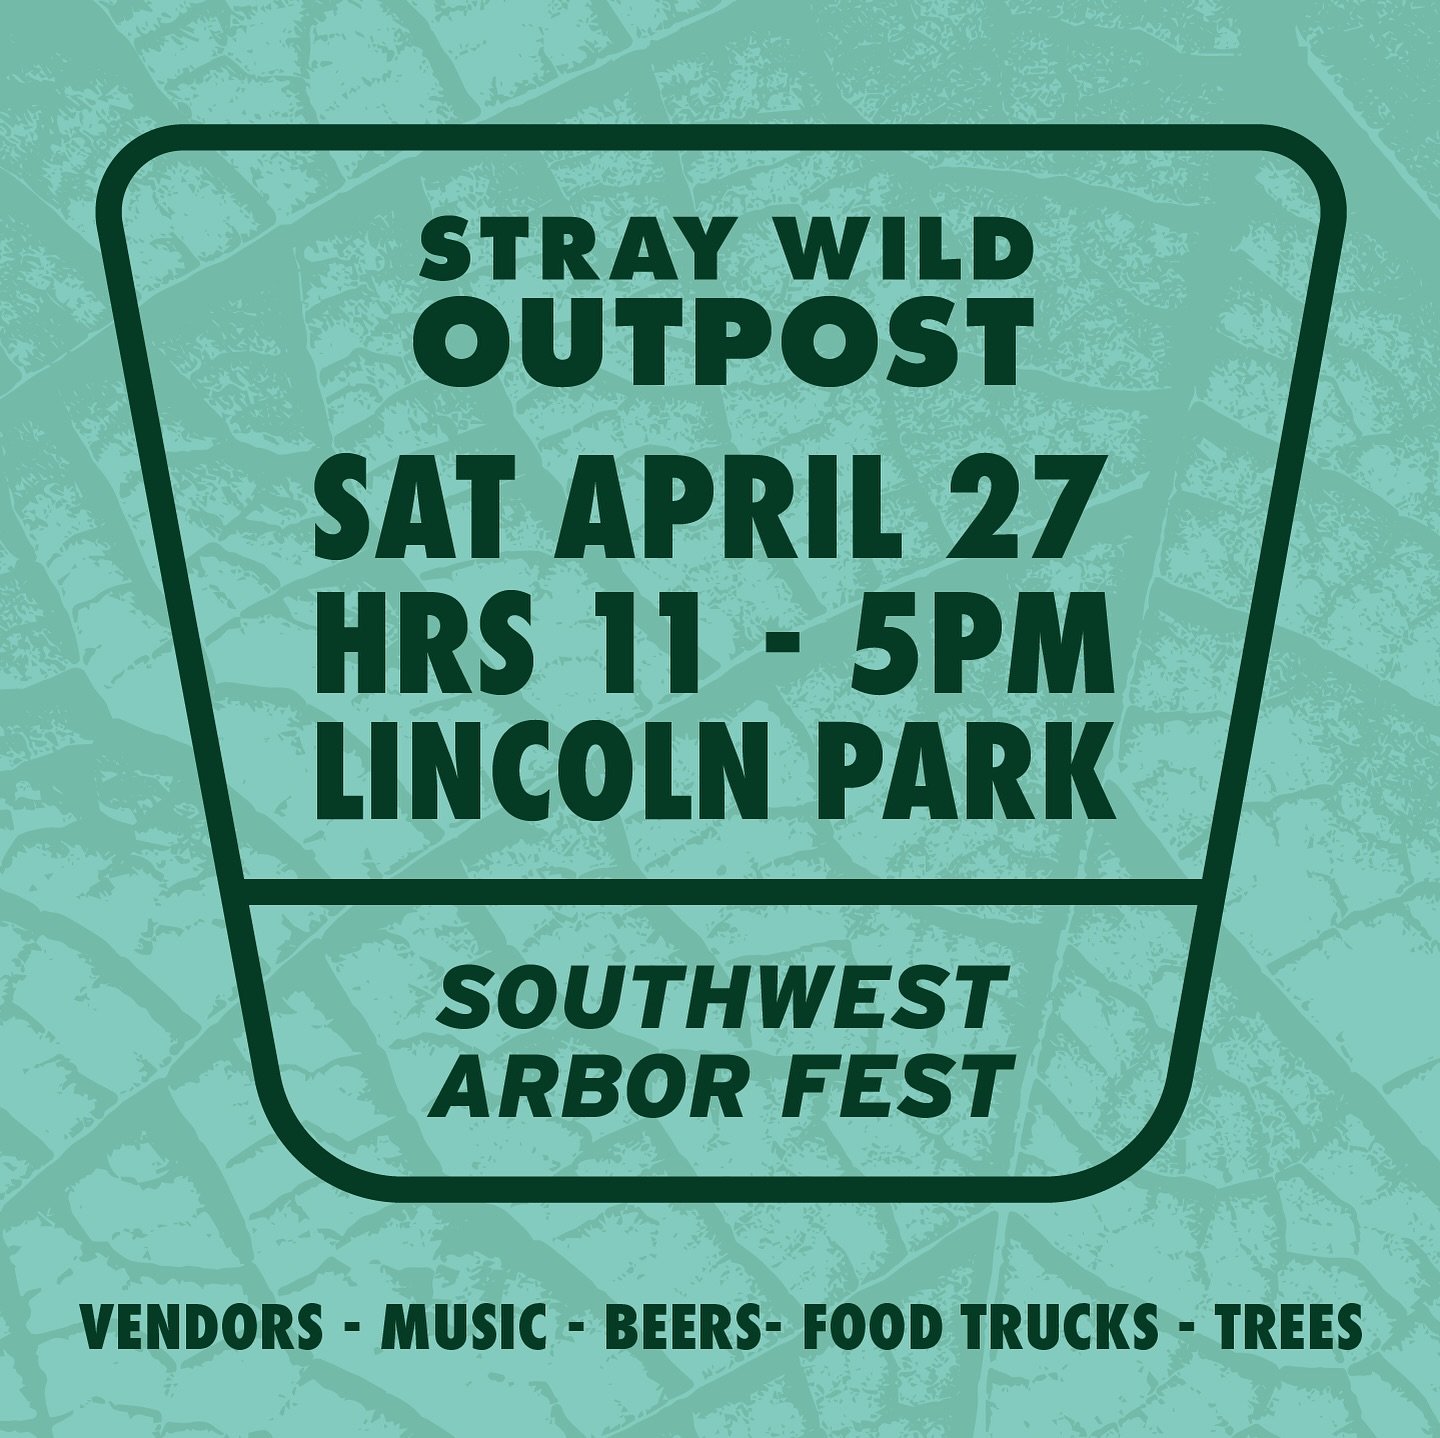 Come on over to Southwest Arbor fest at Lincoln Park this Saturday for a grand old time of music, food trucks, beer and amazing vendors. Oh and don&rsquo;t forget about the trees!🌲 😀